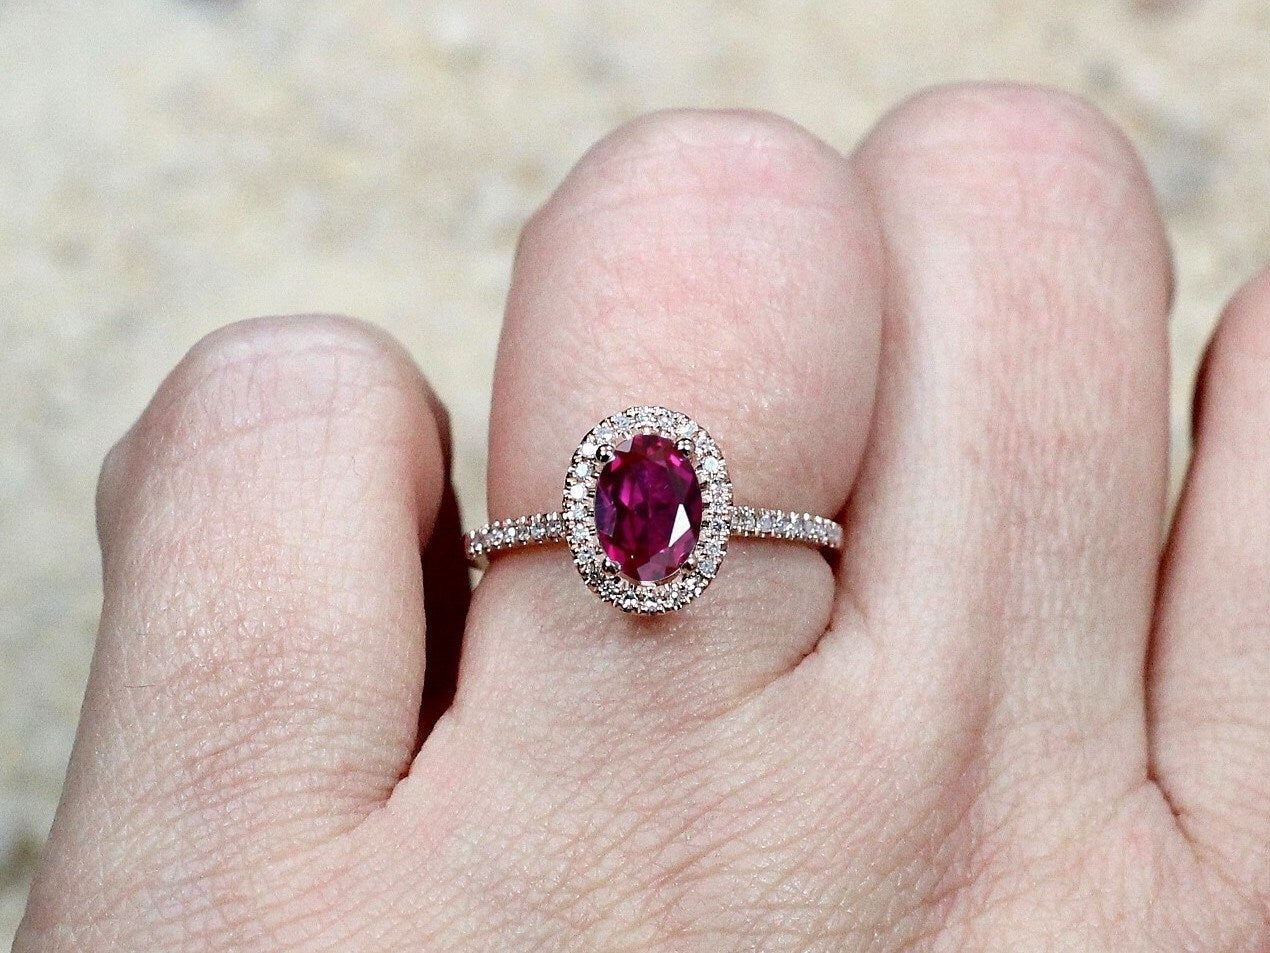 1ct Ovale 7x5mm Red Ruby & Diamonds Oval Halo Engagement Ring BellaMoreDesign.com